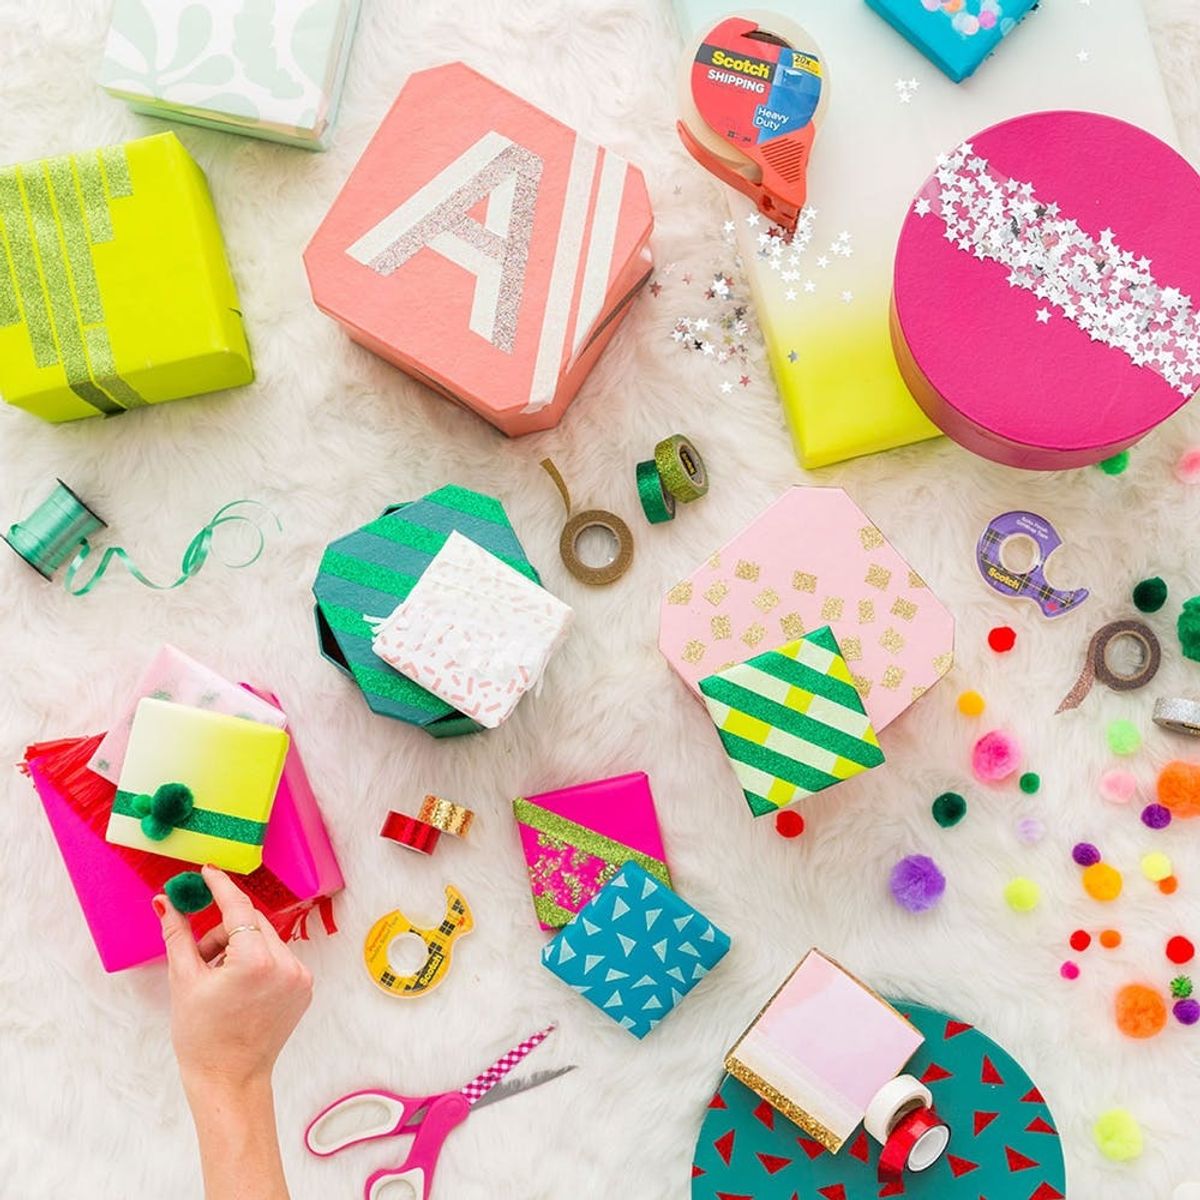 21 Hacks for Wrapping a Gift Perfectly Every Time